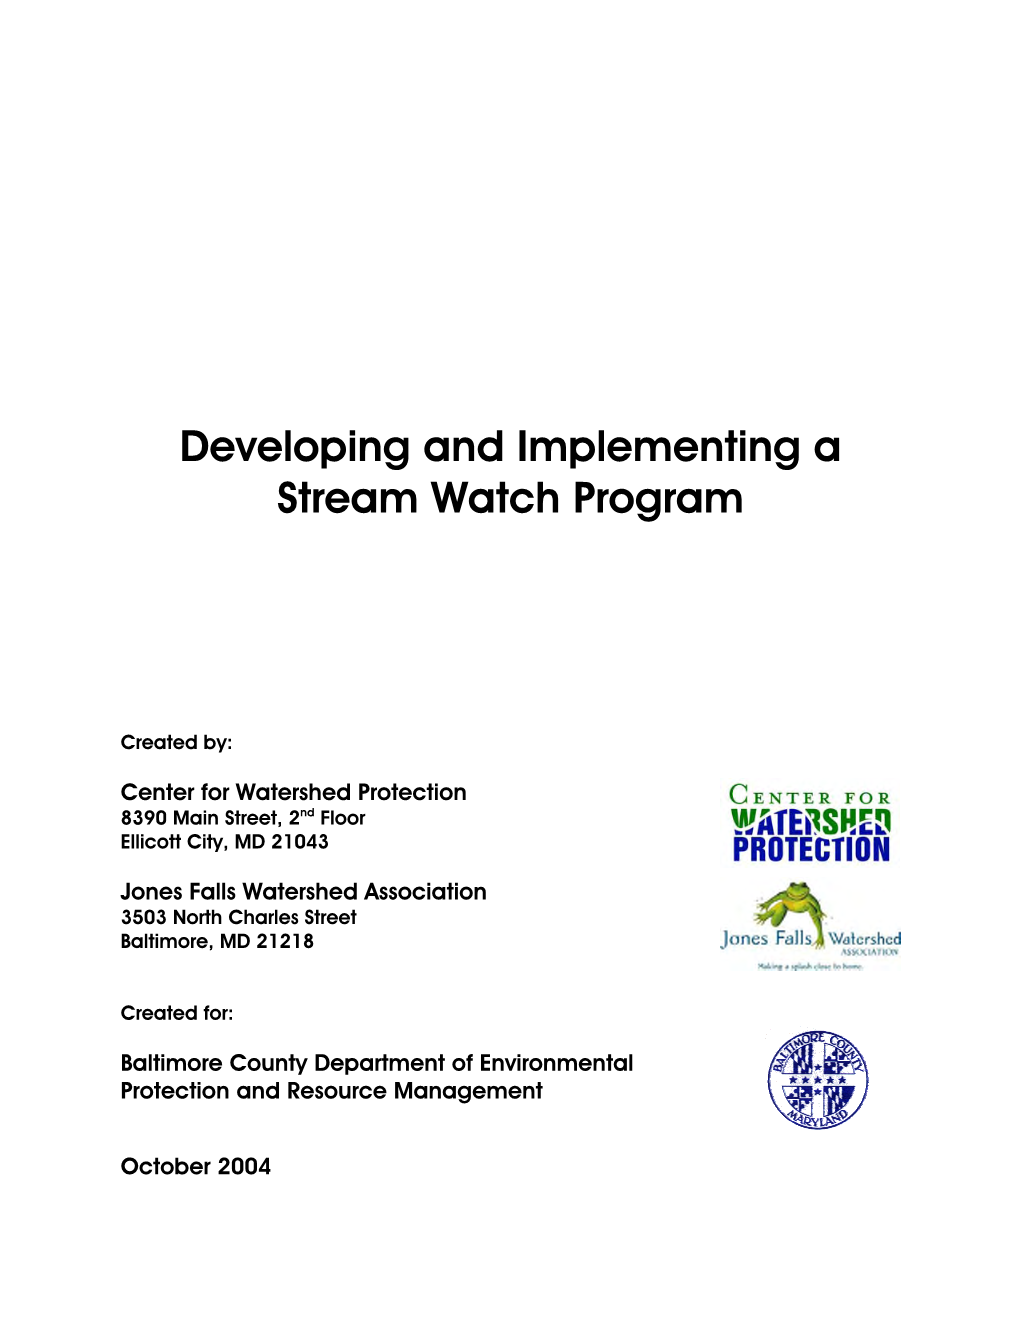 Developing and Implementing a Stream Watch Program